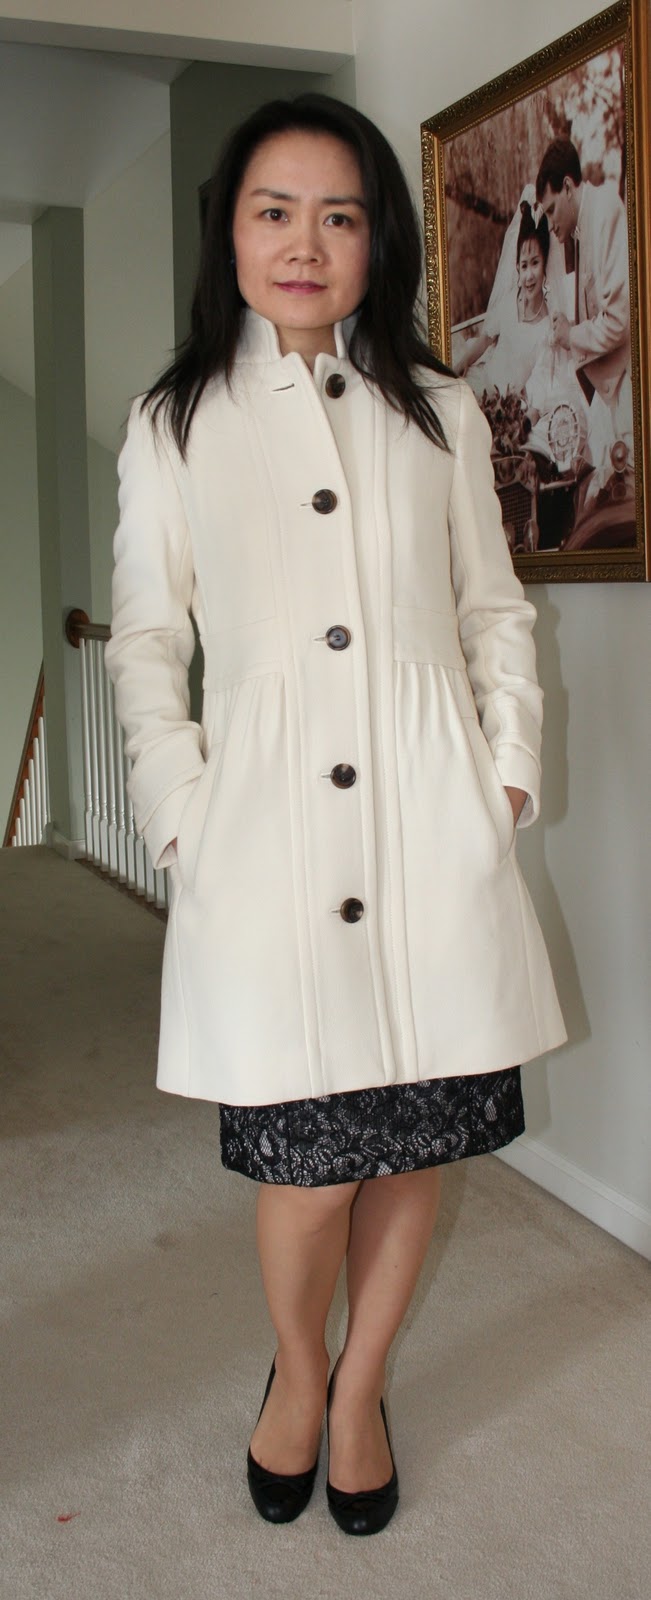 Vicky's Daily Fashion Blog: Review: J.Crew coats - Lady Day vs. Colletta